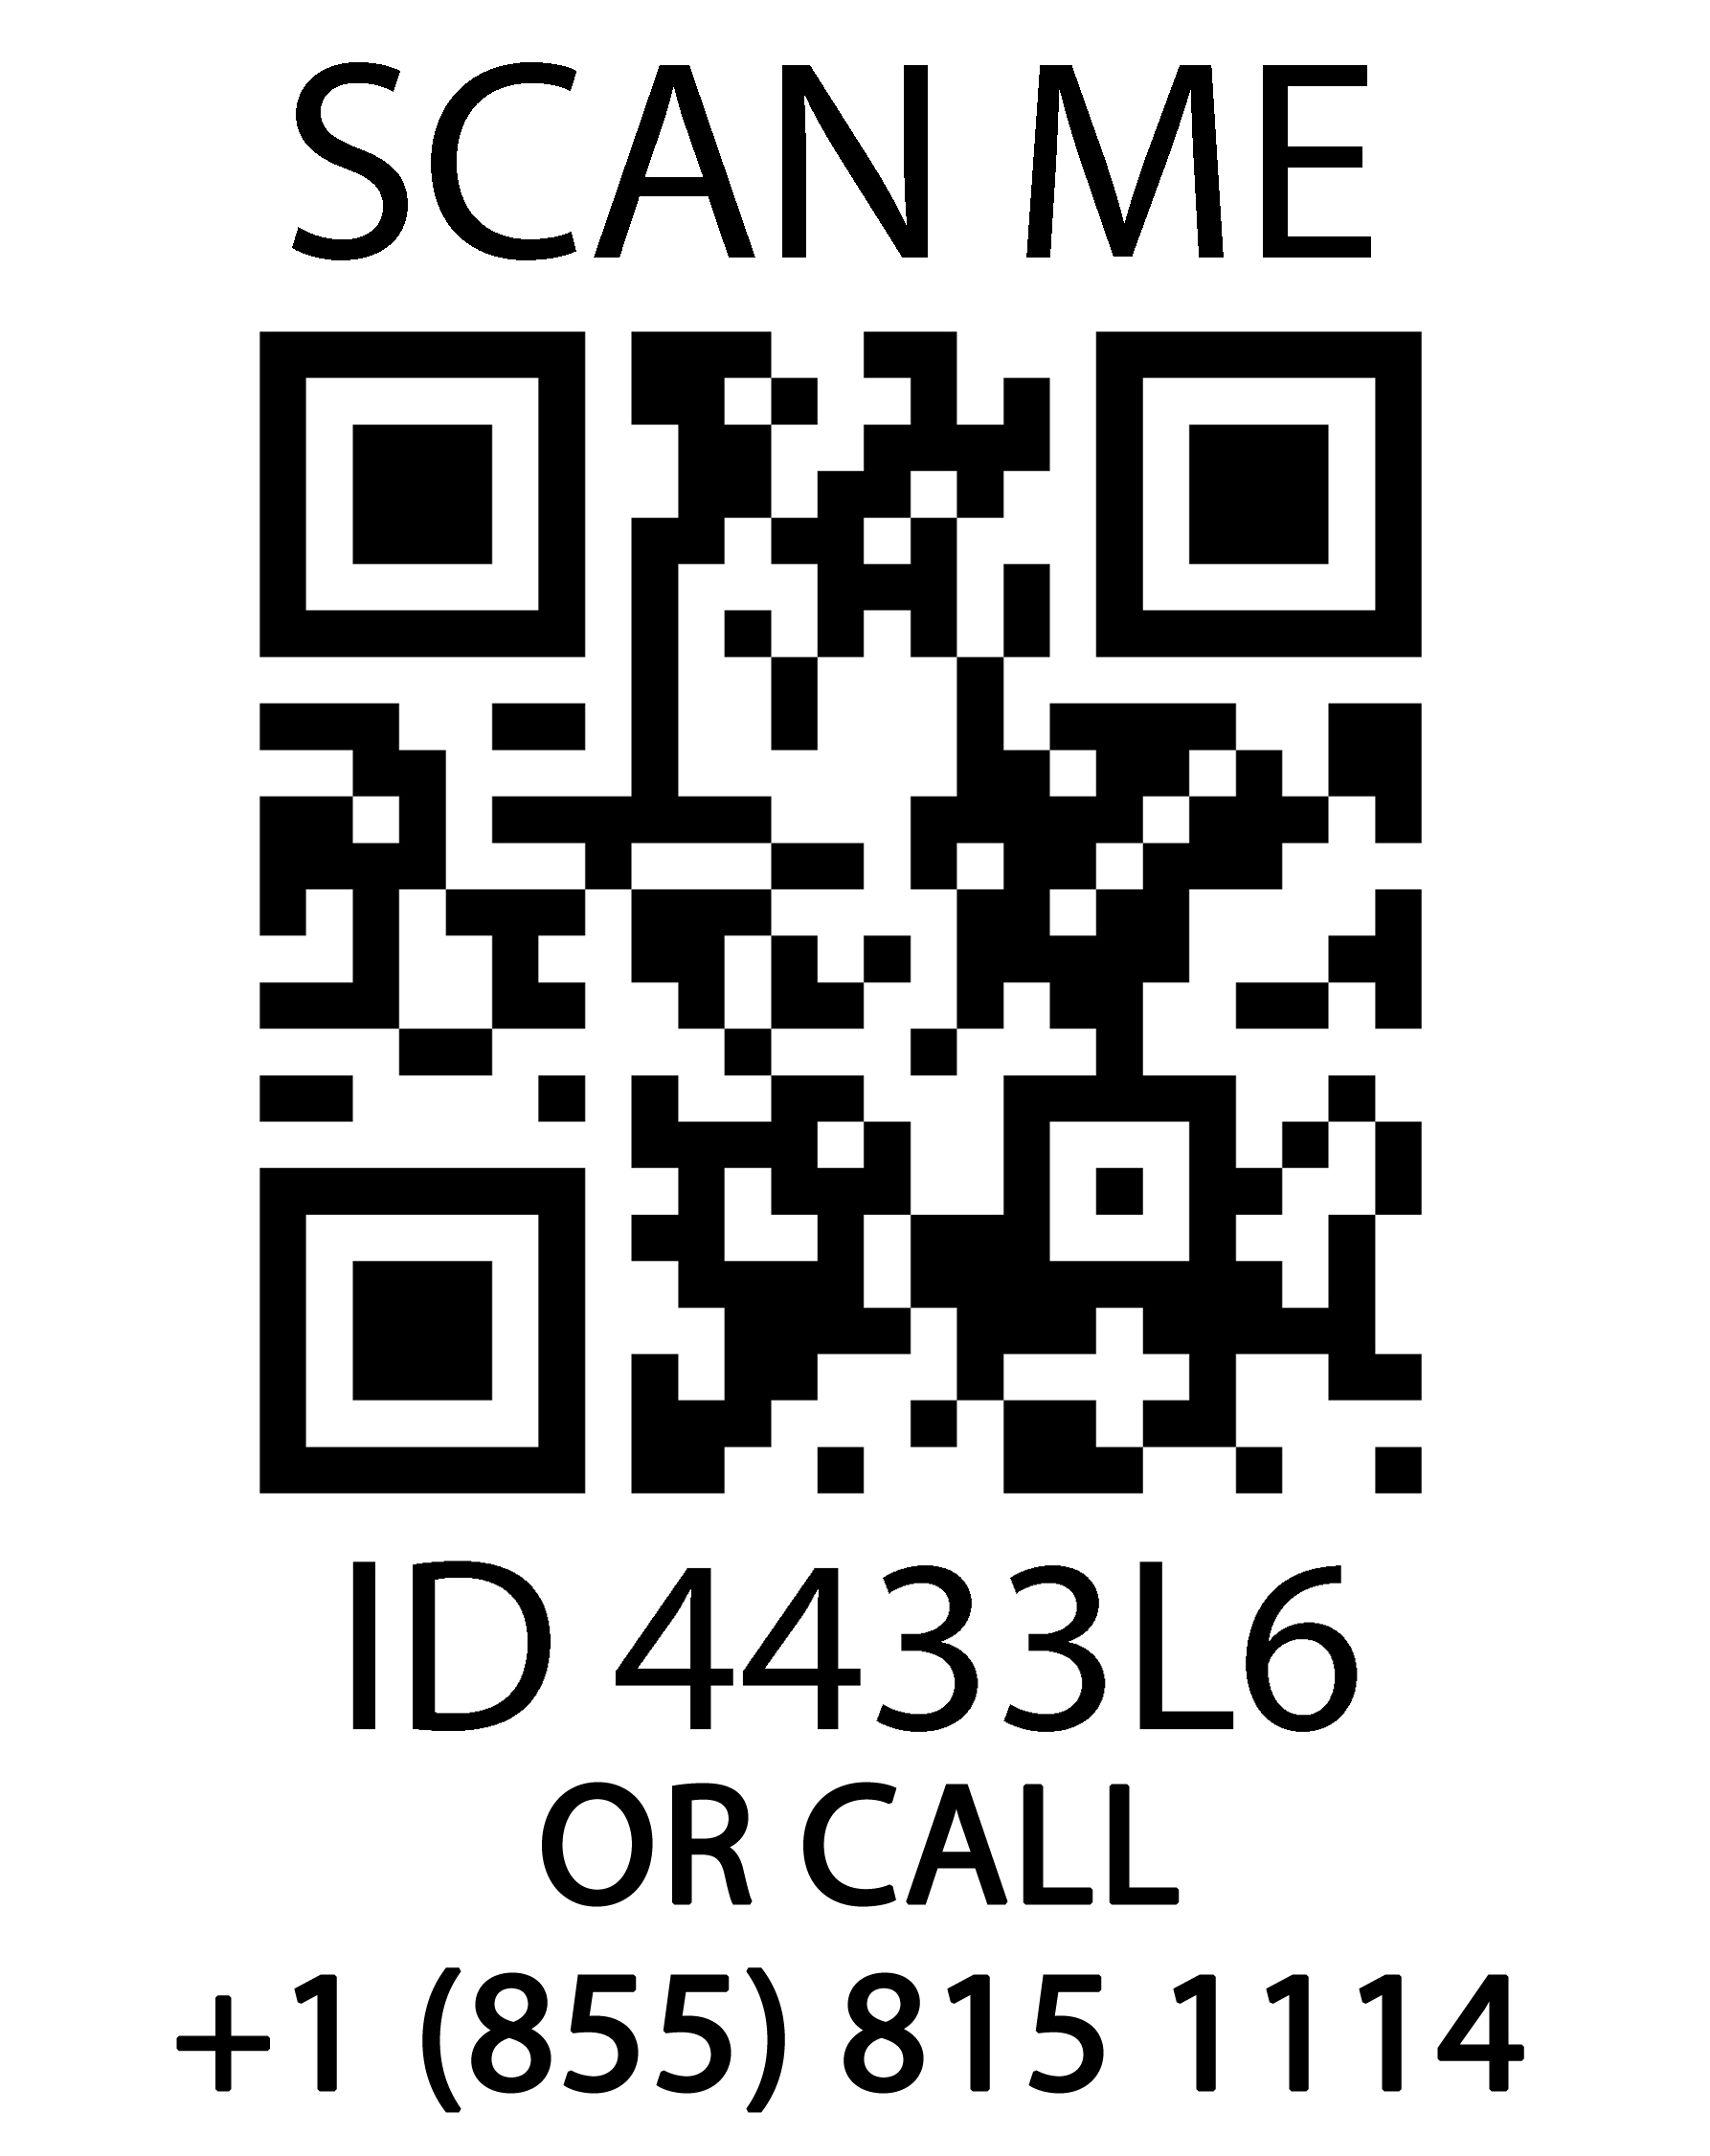 QR Codes used to keep kids safe! Child ID/ medical Id using QR Codes